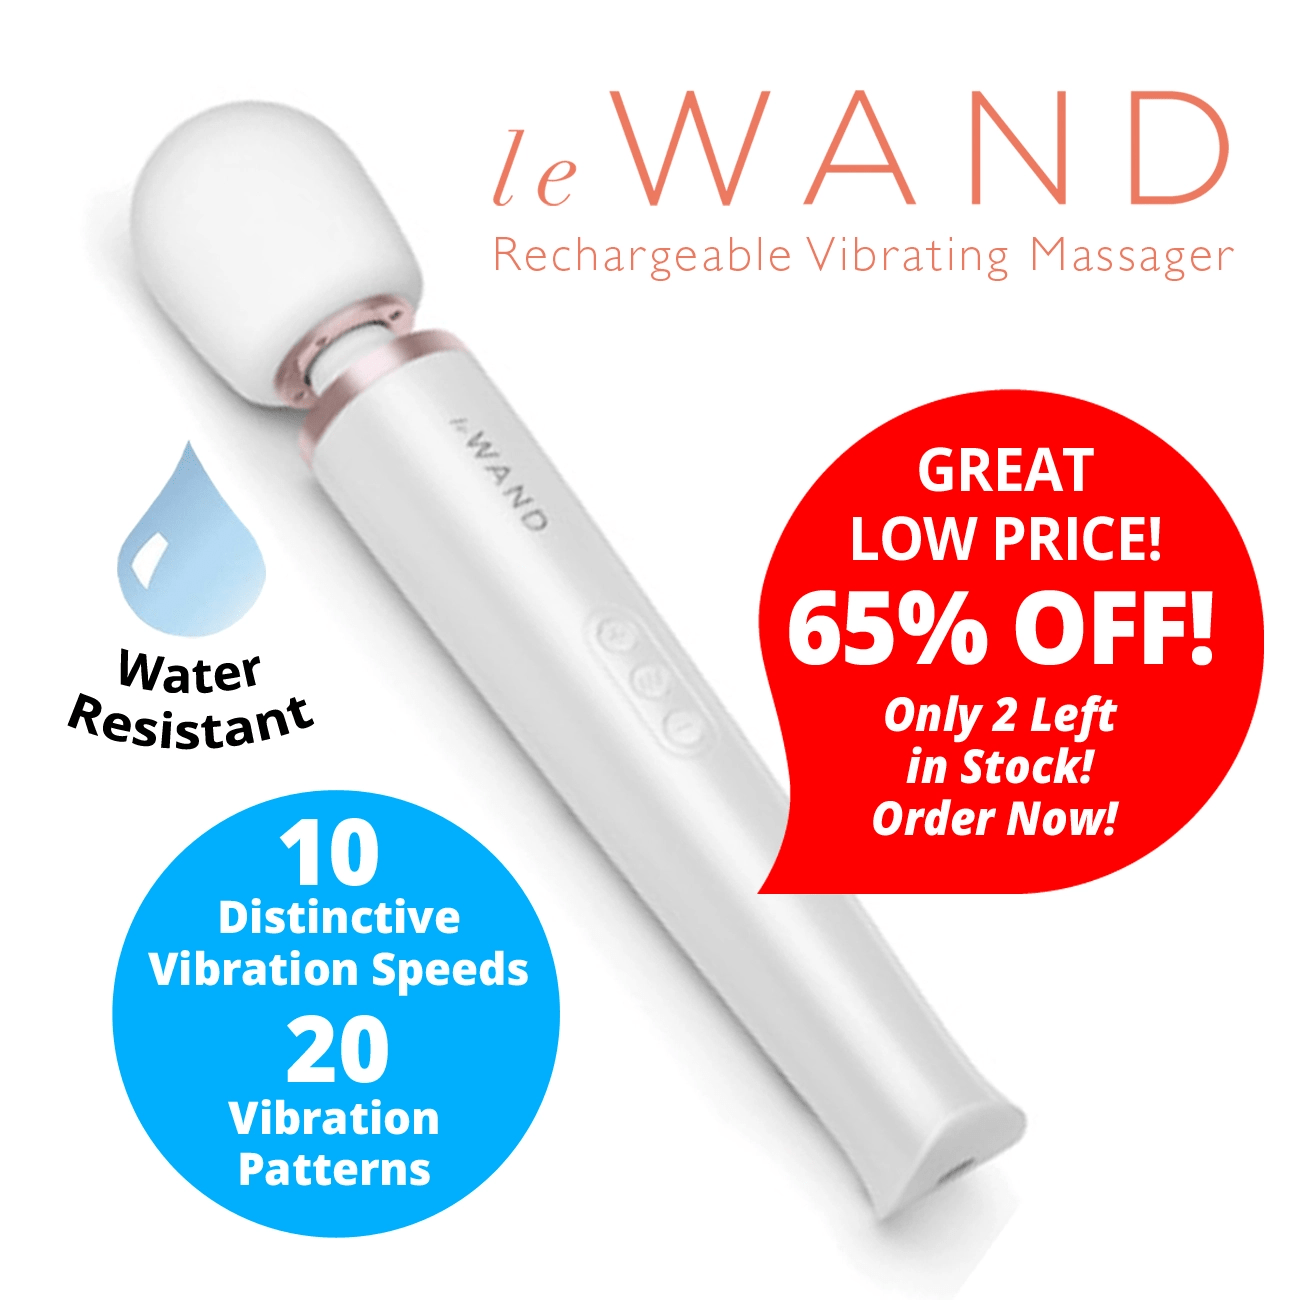 Le Wand Pearl White Rechargeable Review - Sex Toys - Romantic Depot New York Stores